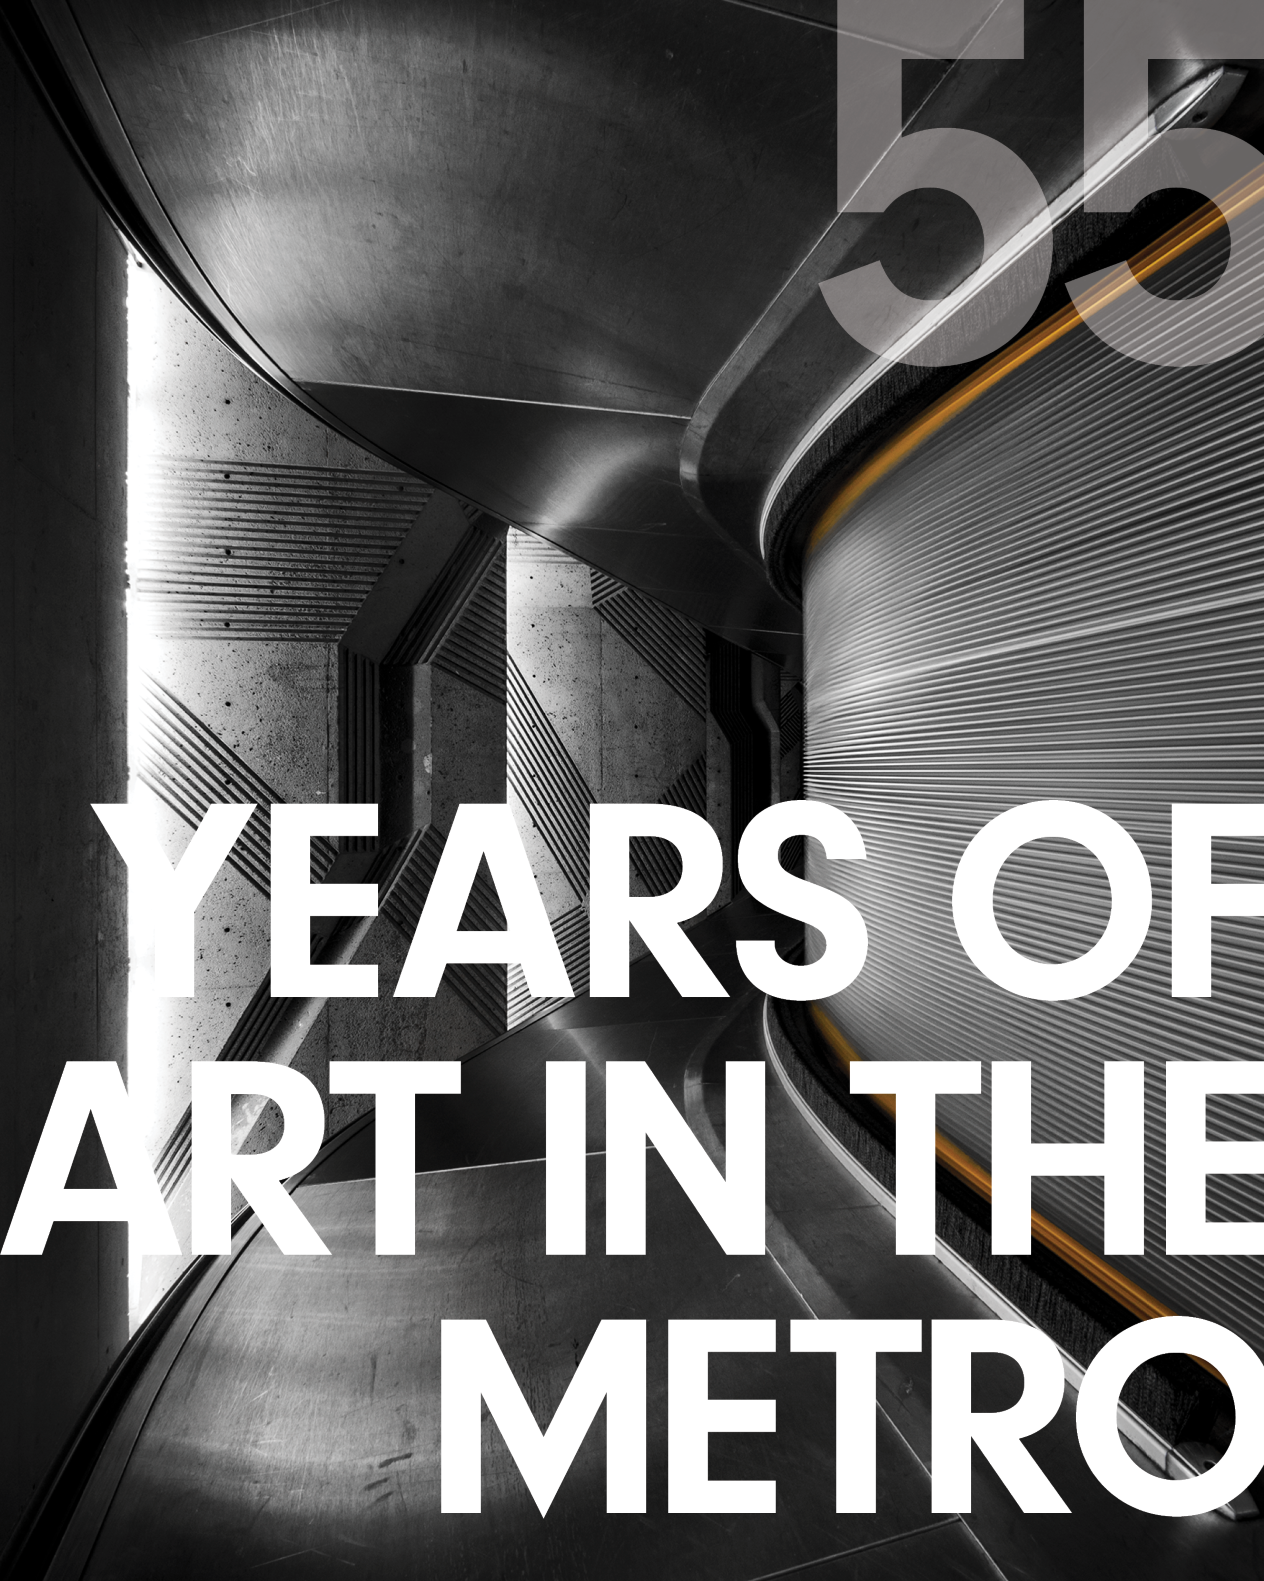 Front cover design of Montréal Metro Art Catalogue. Photo of an escalator by Christopher Forsyth with text reading "55 Years of art in the metro" on top.